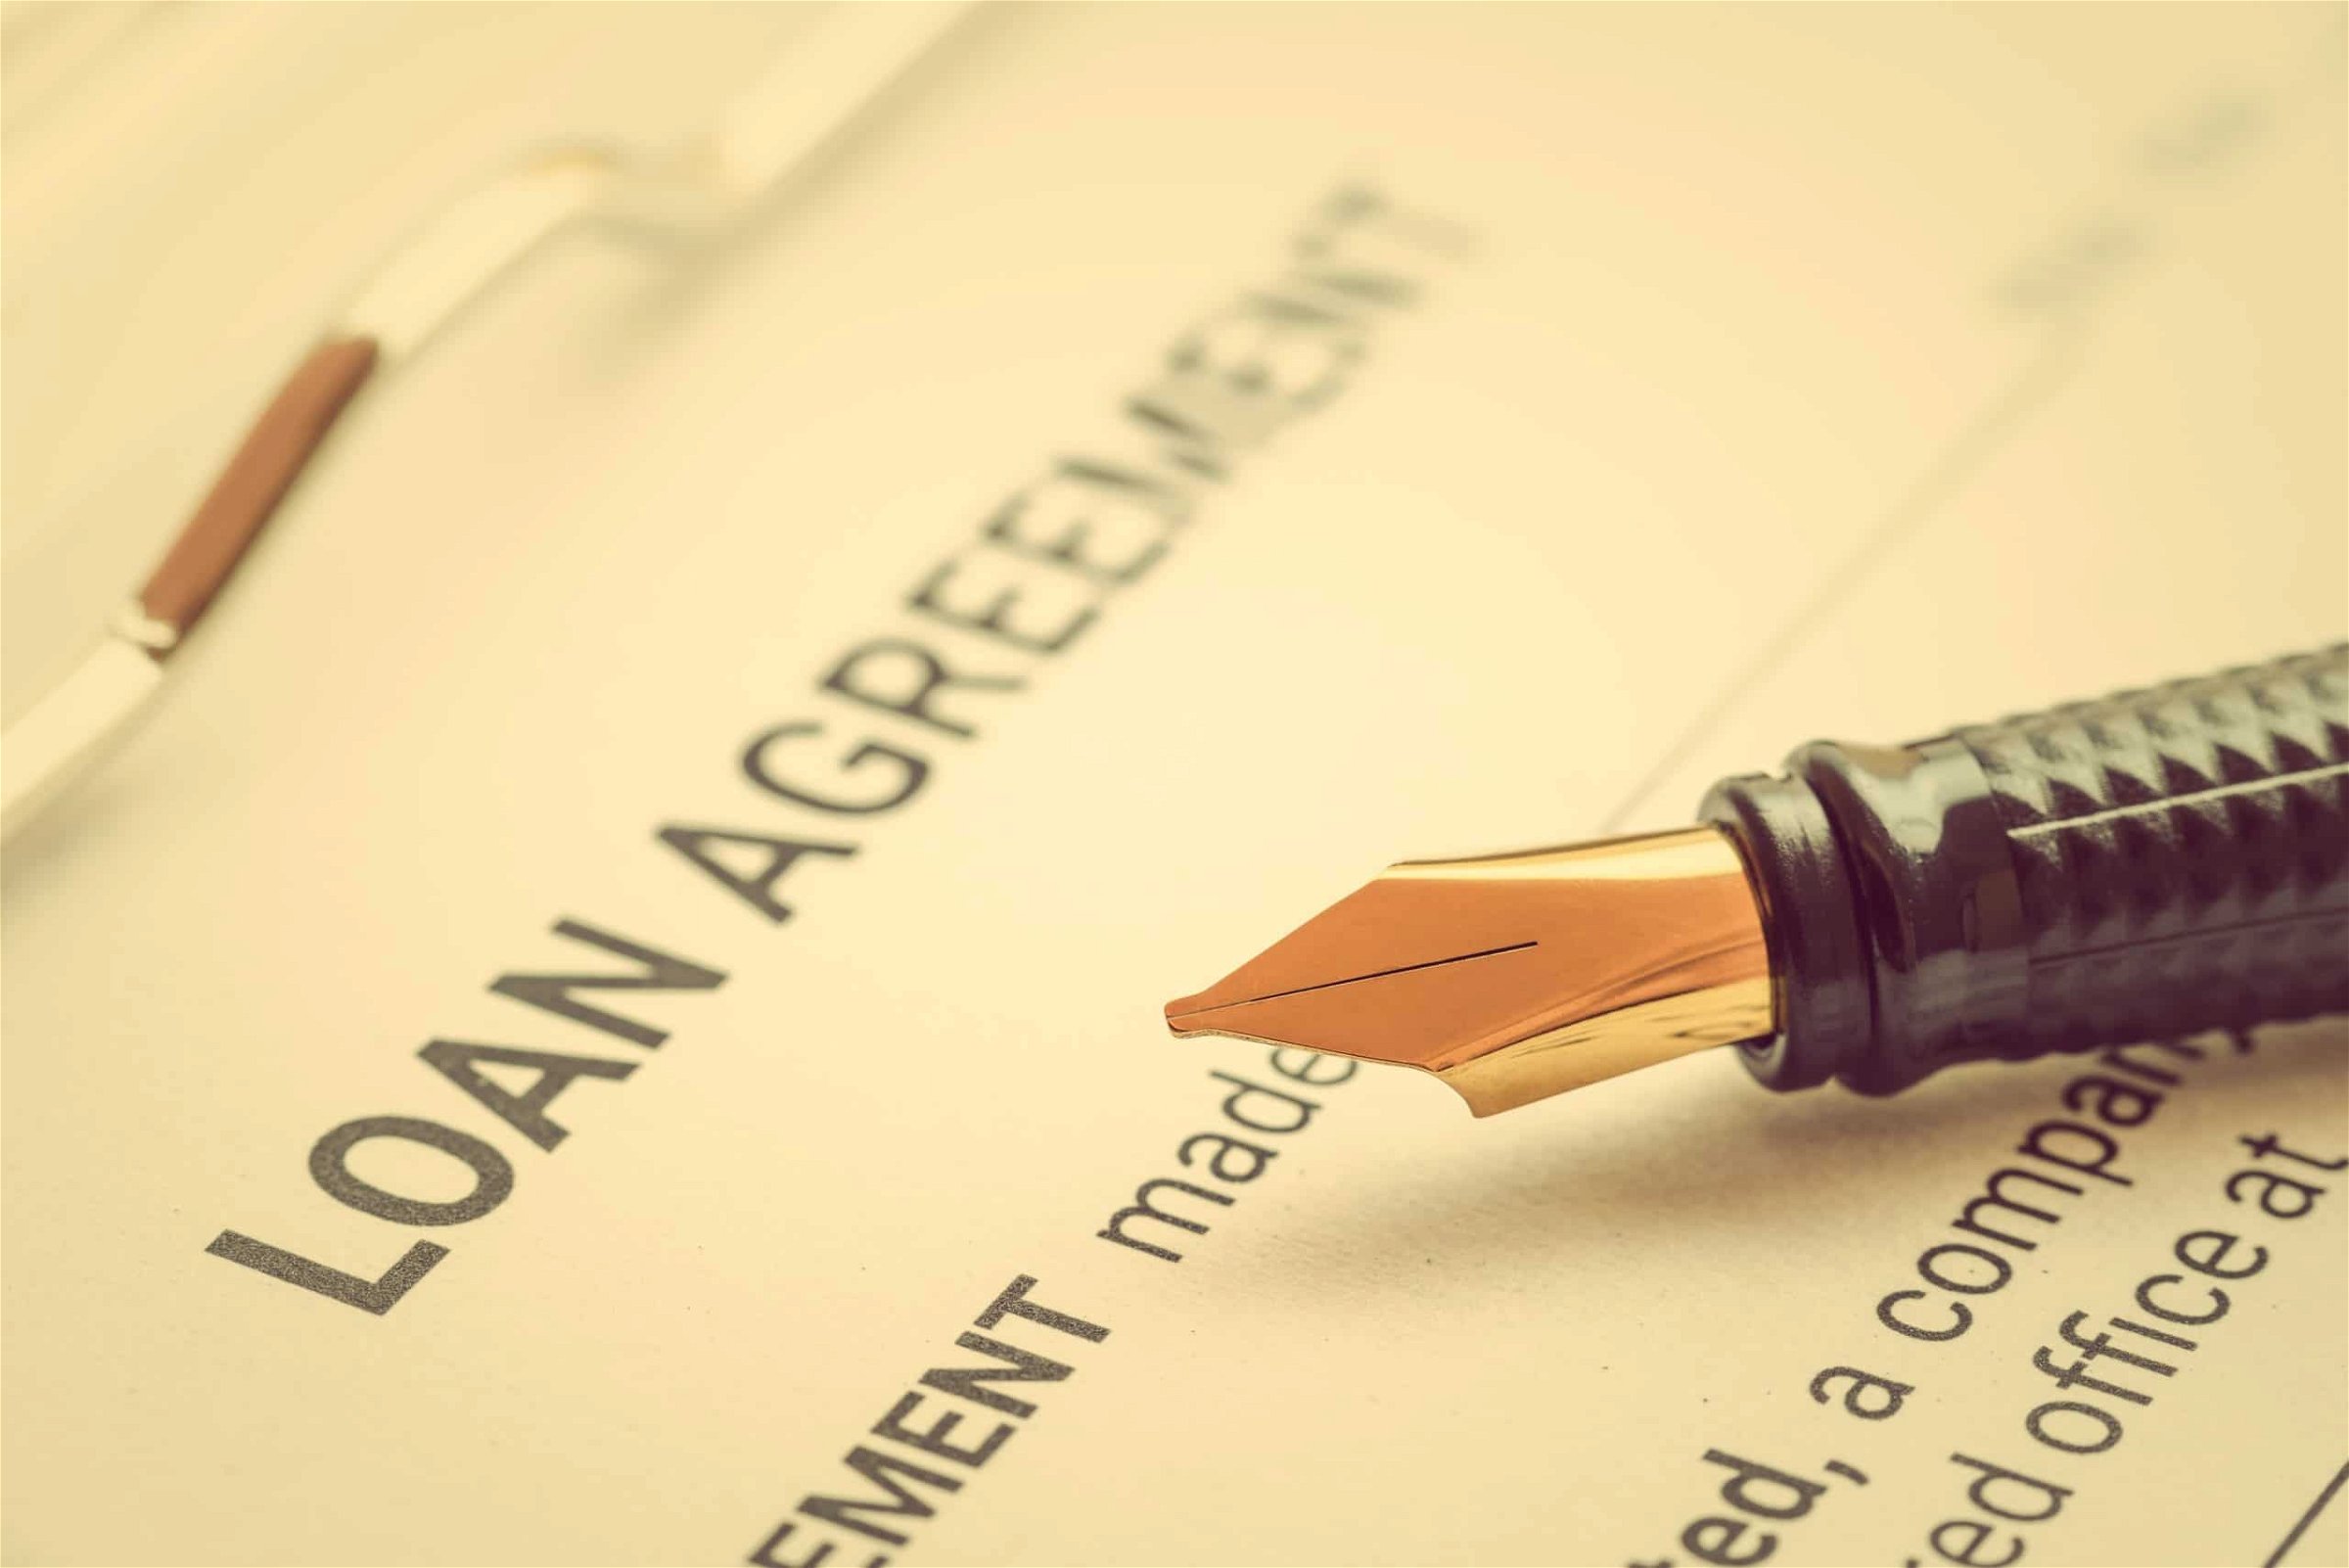 Business loan agreement or legal document concept : Fountain pen on a loan agreement paper form. Loan agreement is a contract between a borrower and a lender, a compilation of various mutual promises.